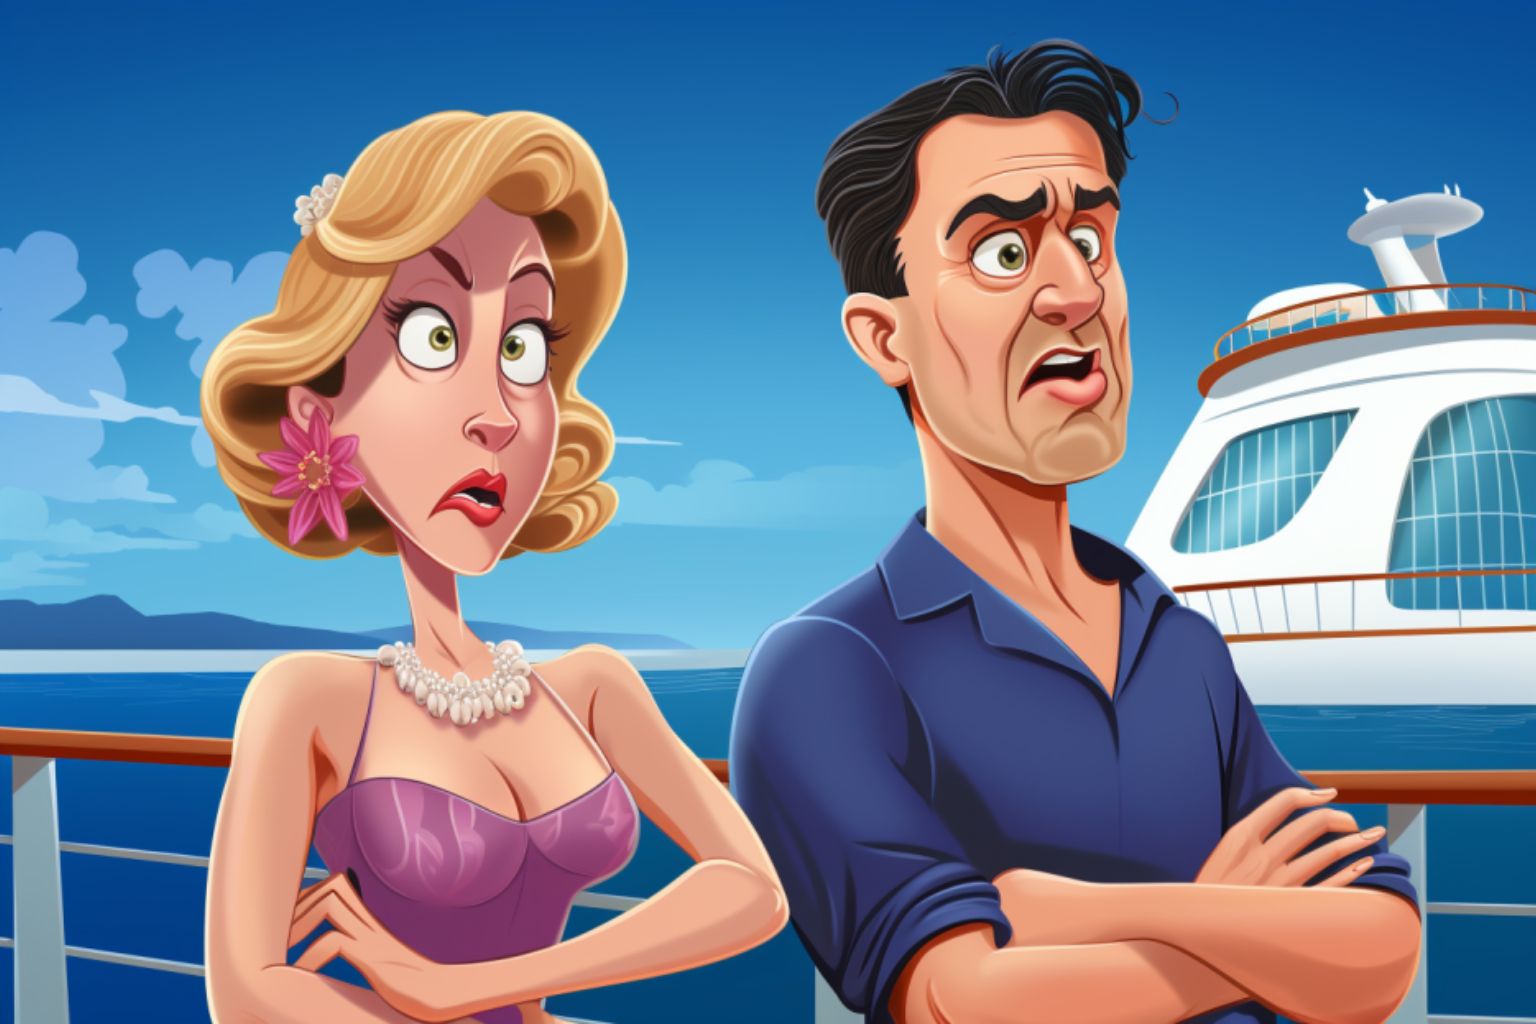 The Pirri's are unhappy with their cruise on the Carnival Destiny, and they're even more unhappy with how the cruise line responded.